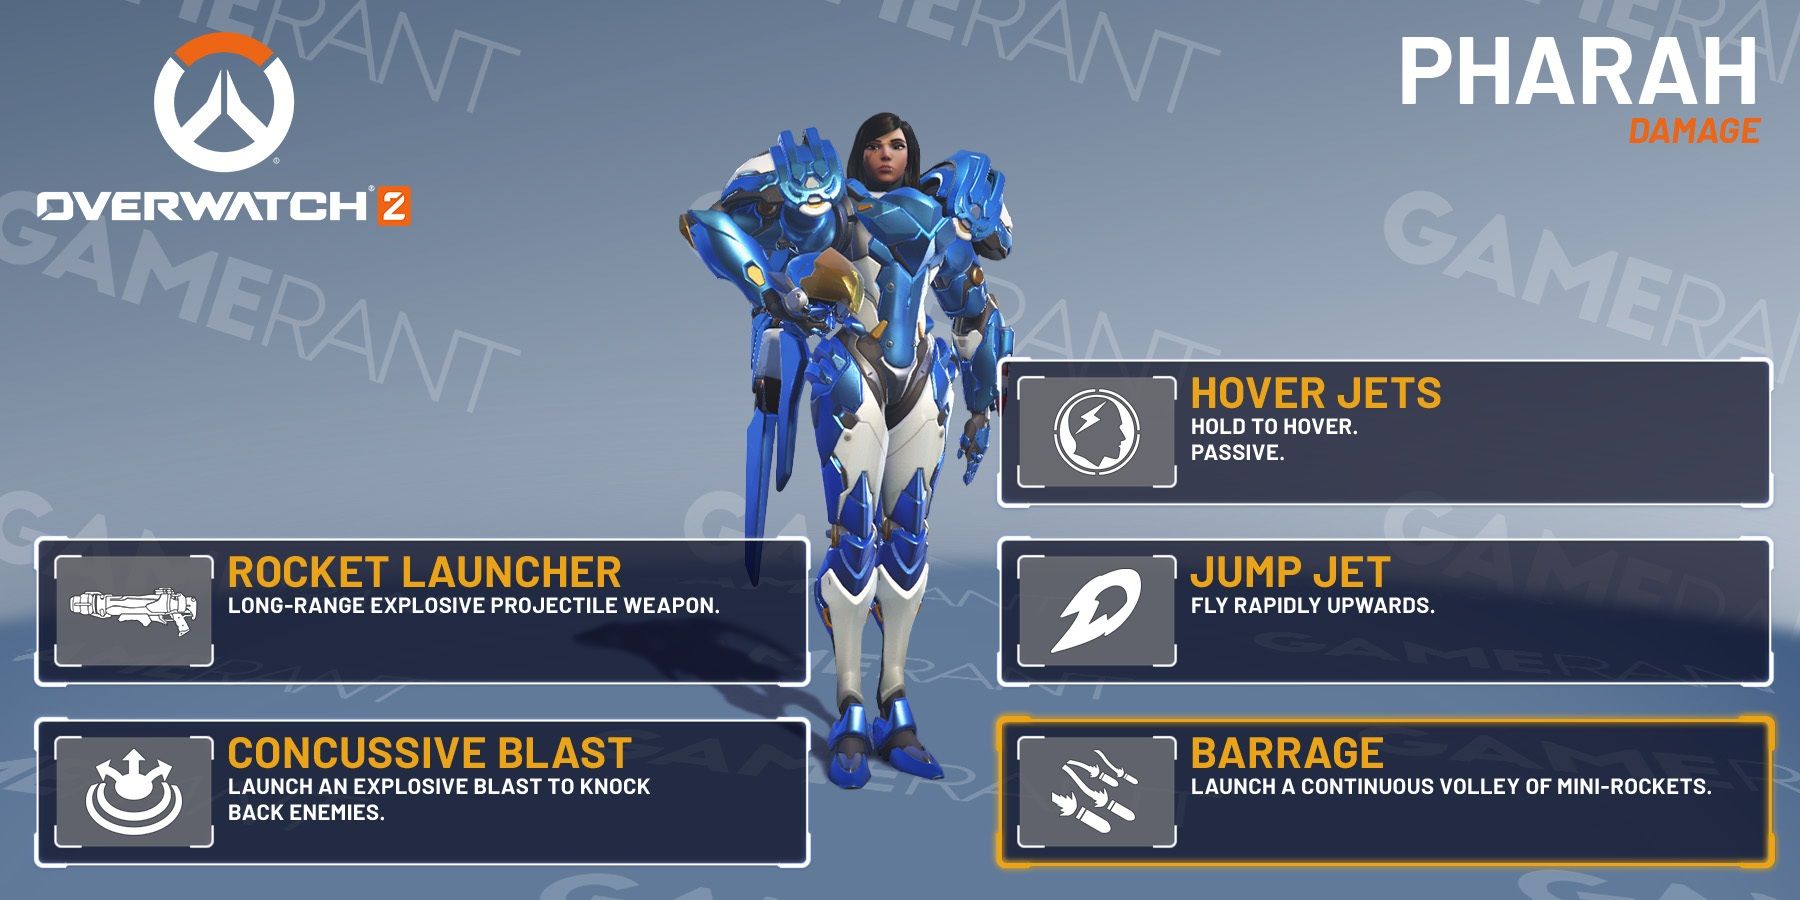 Overwatch 2 Pharah Overview